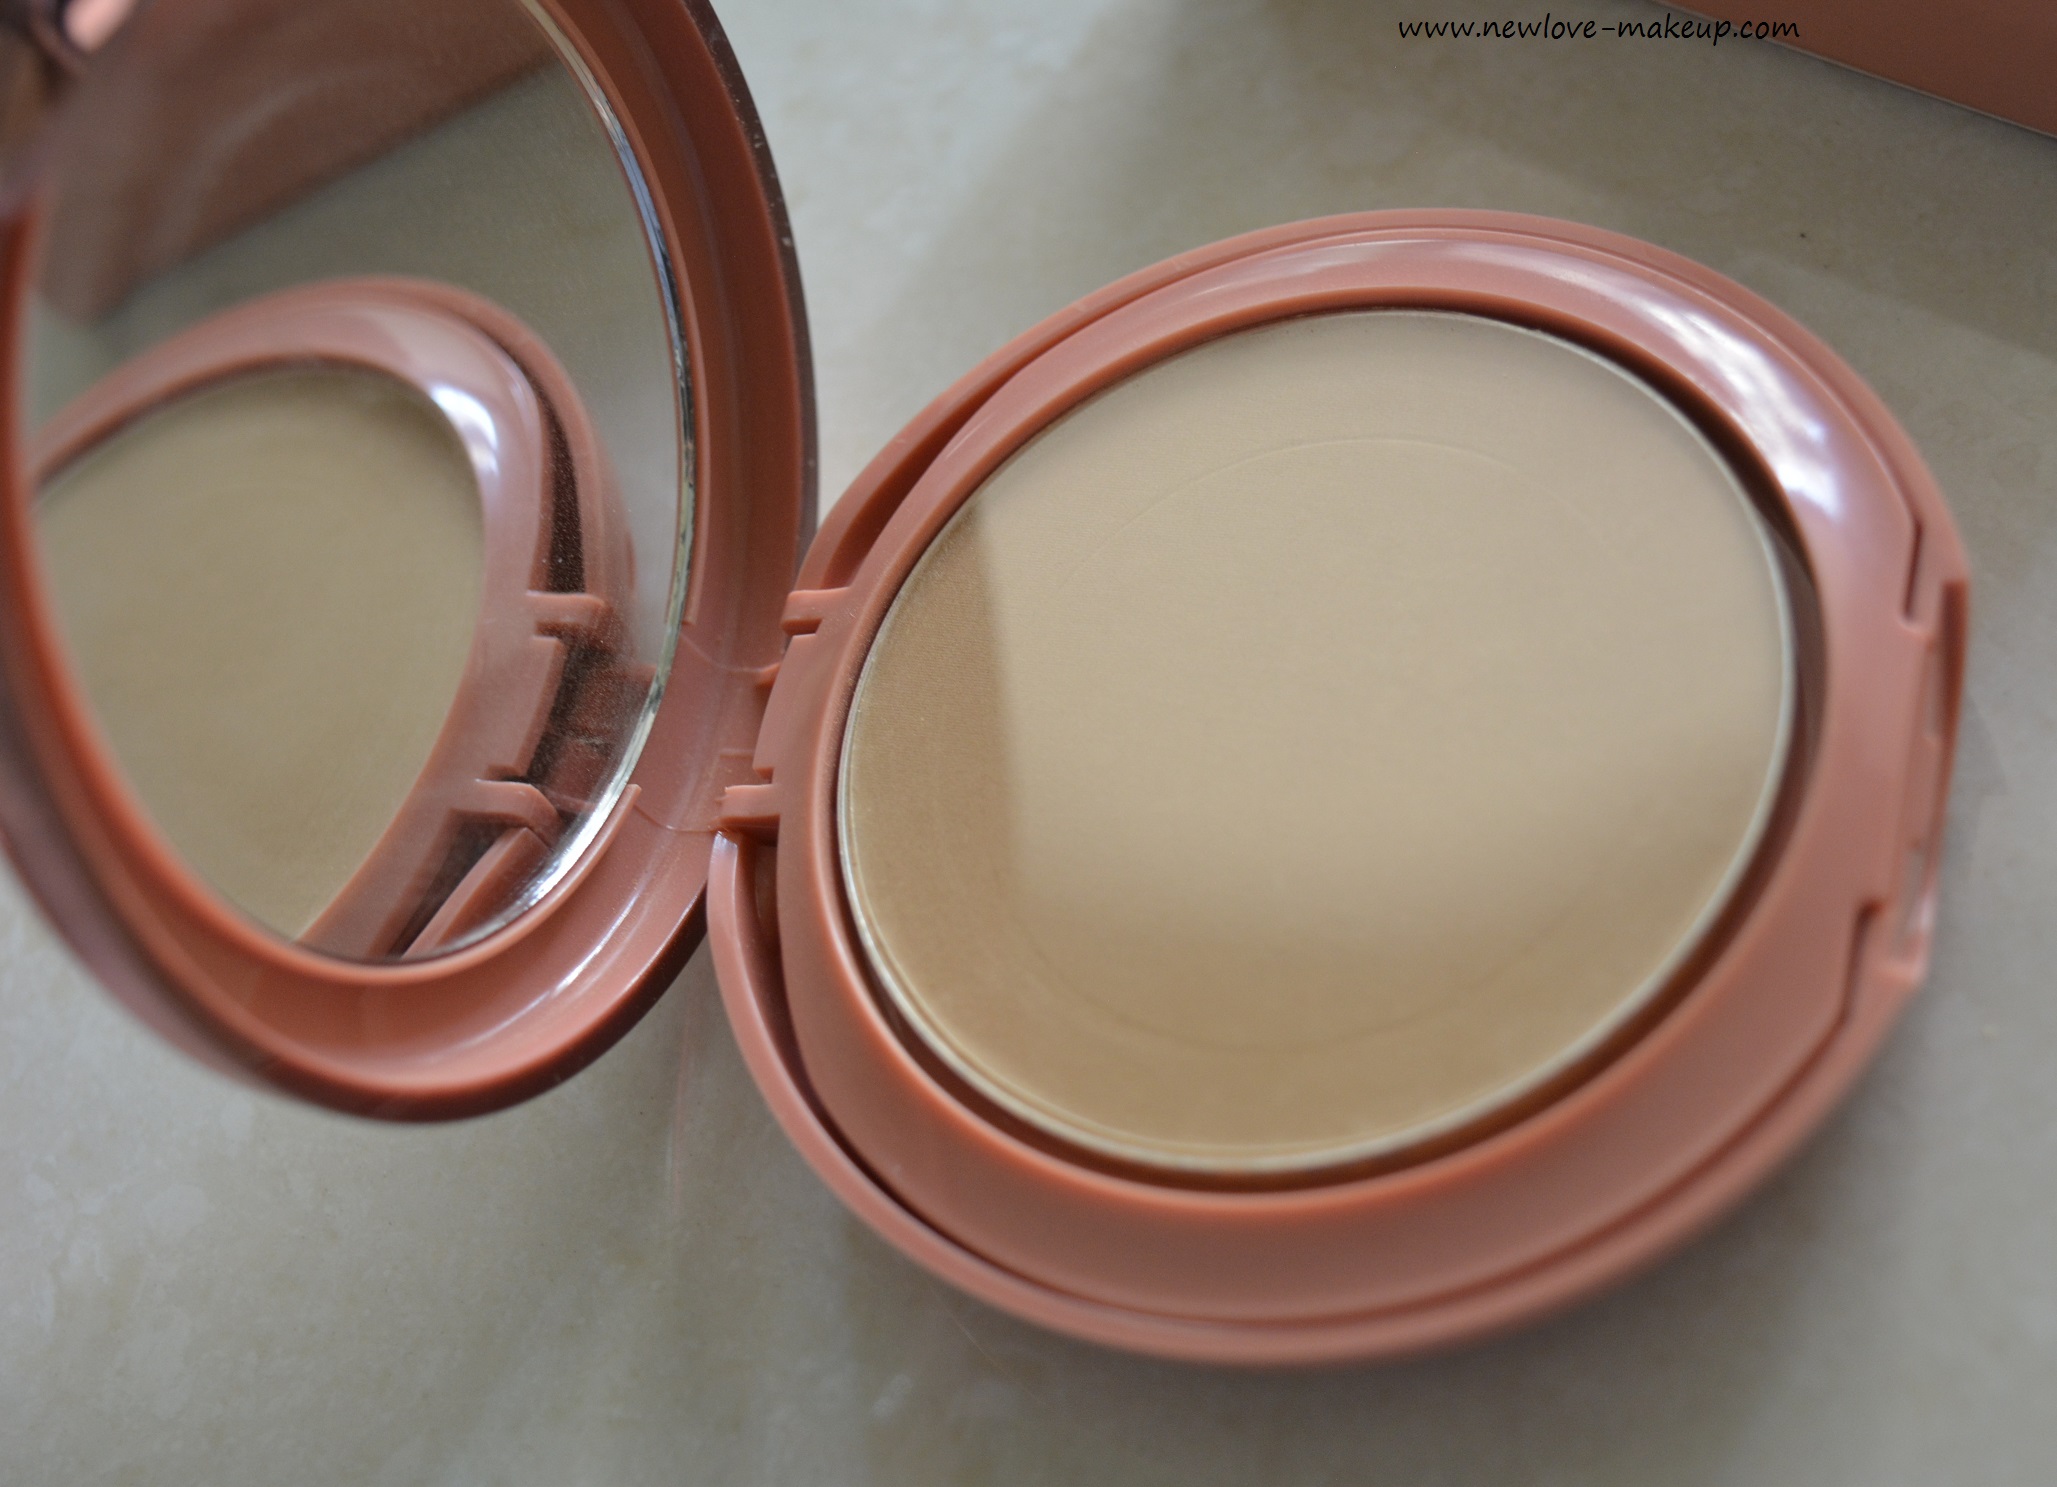 Lakme 9 to 5 Primer + Matte Powder Foundation Review, Swatches